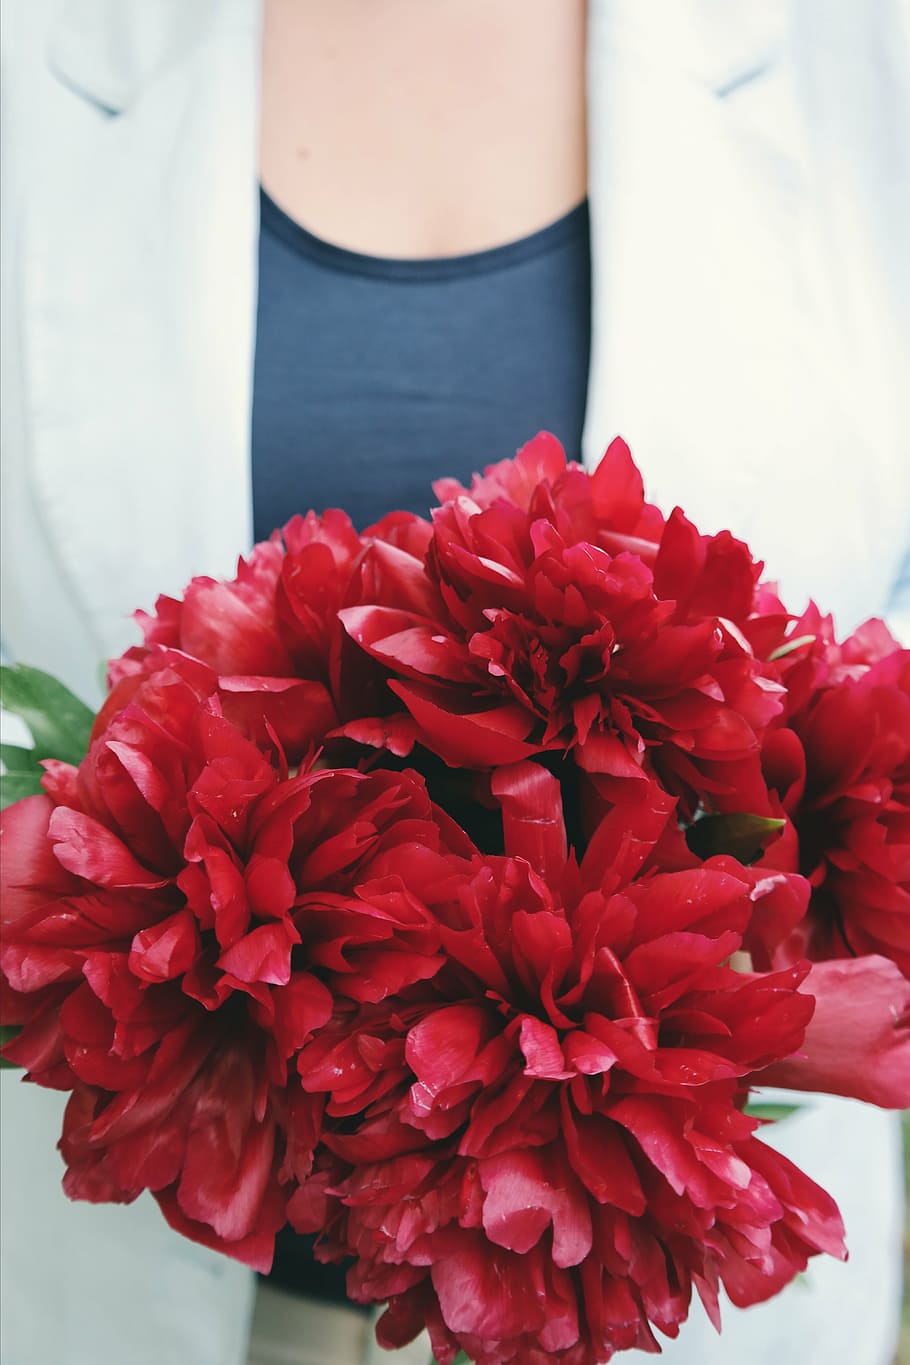 woman, holding, red, peony flowers bouquet, people, chest, flower, petals, bouquet, women